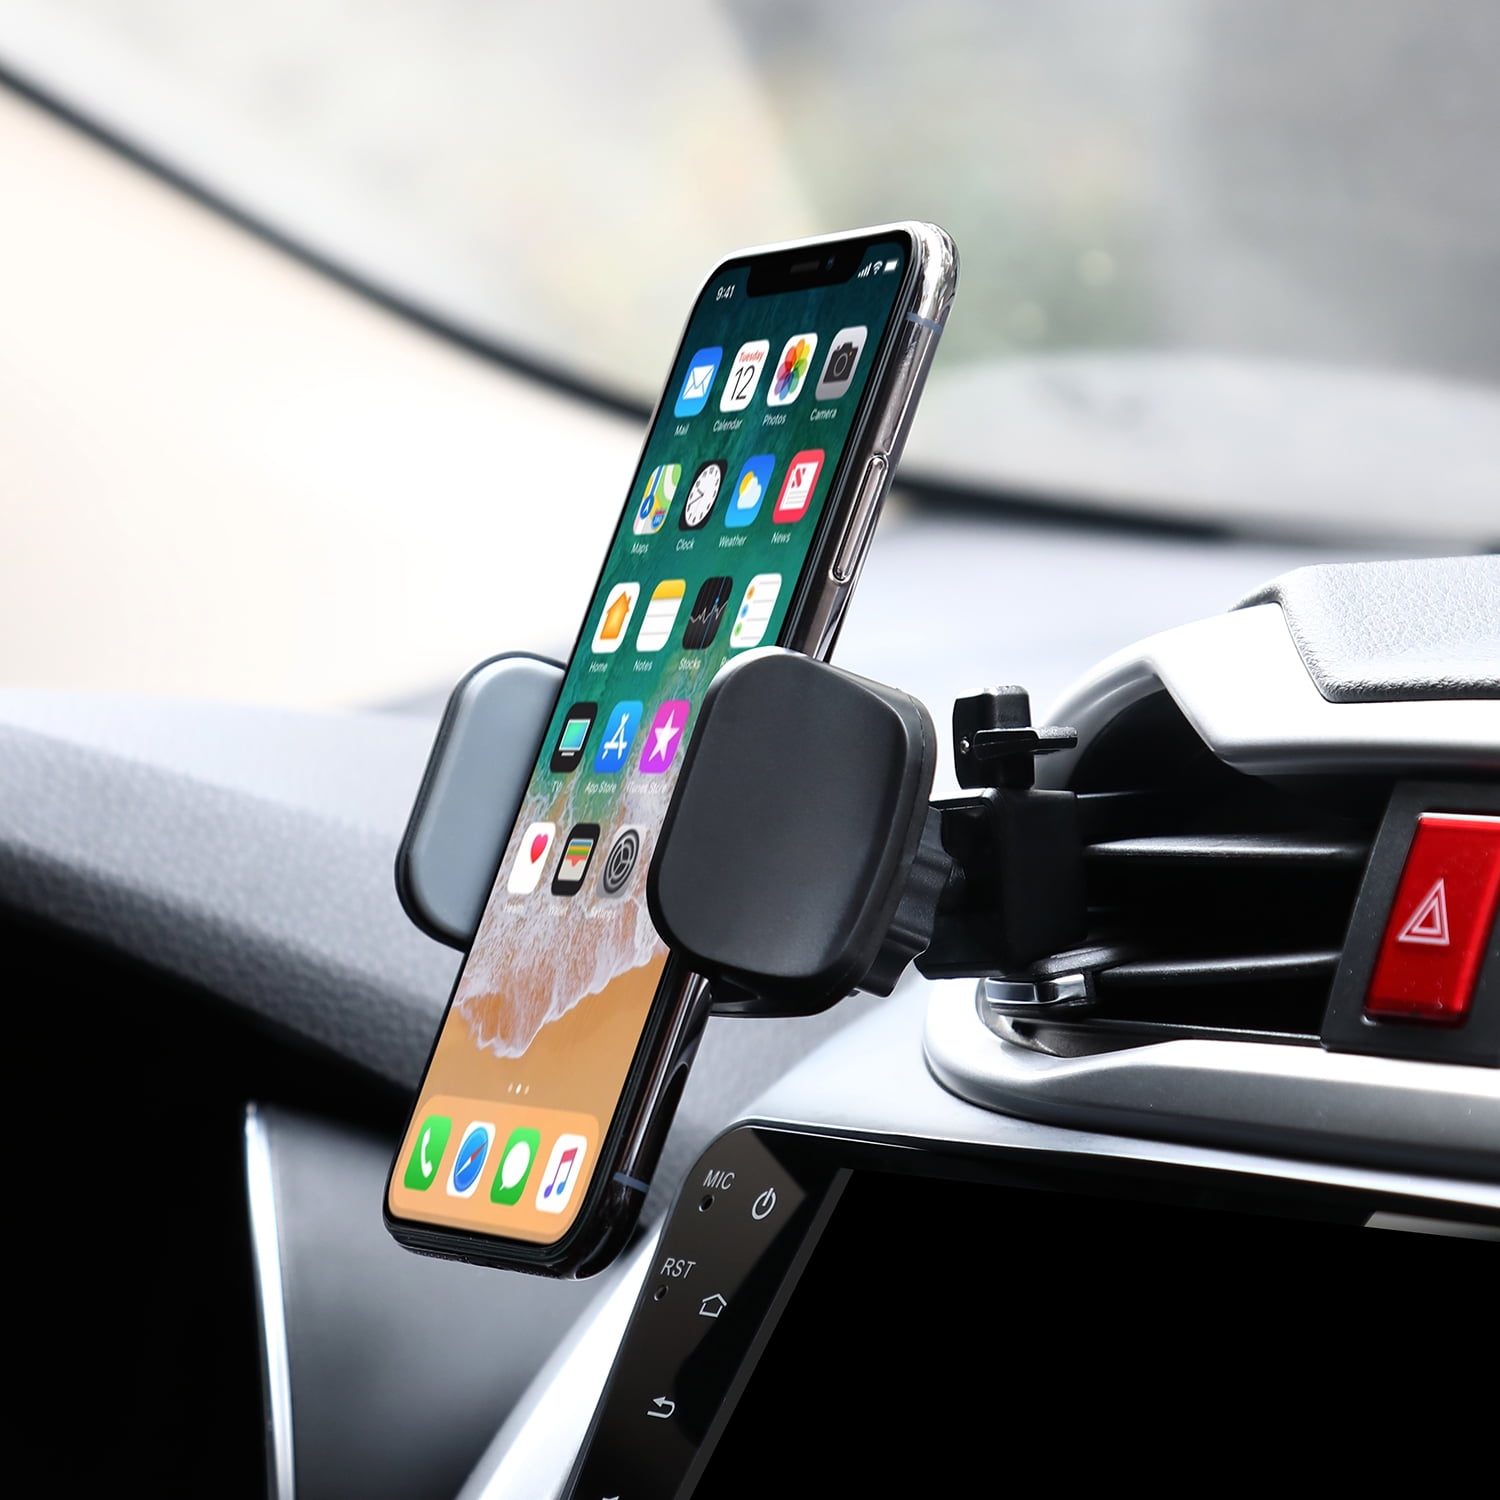 Car Auto Bracket Black Air Vent Mount Holder Cradle Stand Kit For iPhone 5 6 GPS